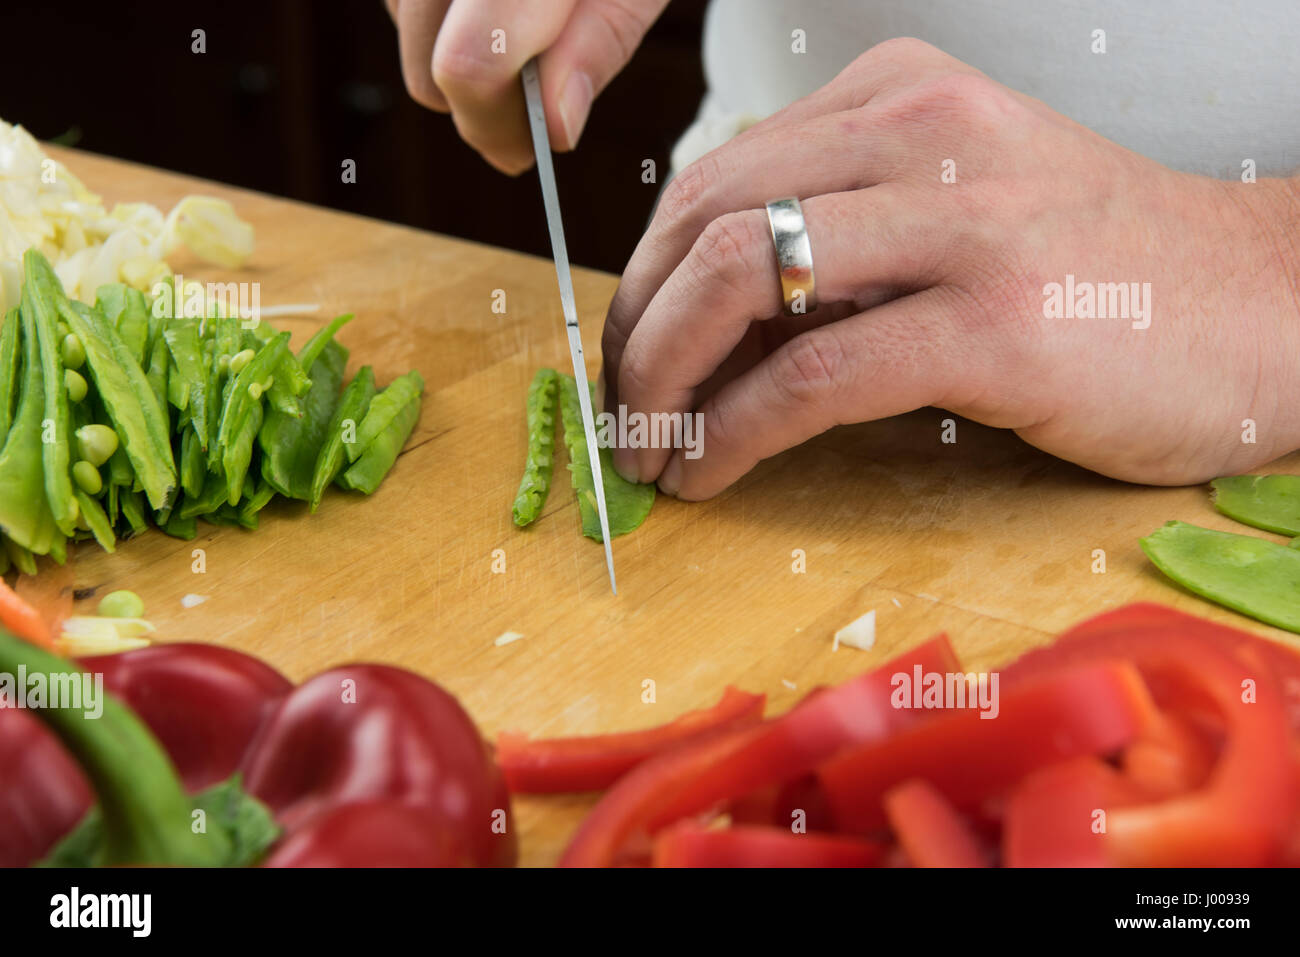 Close Up of Snow Peas Being Sliced on wooden butcher block Stock Photo